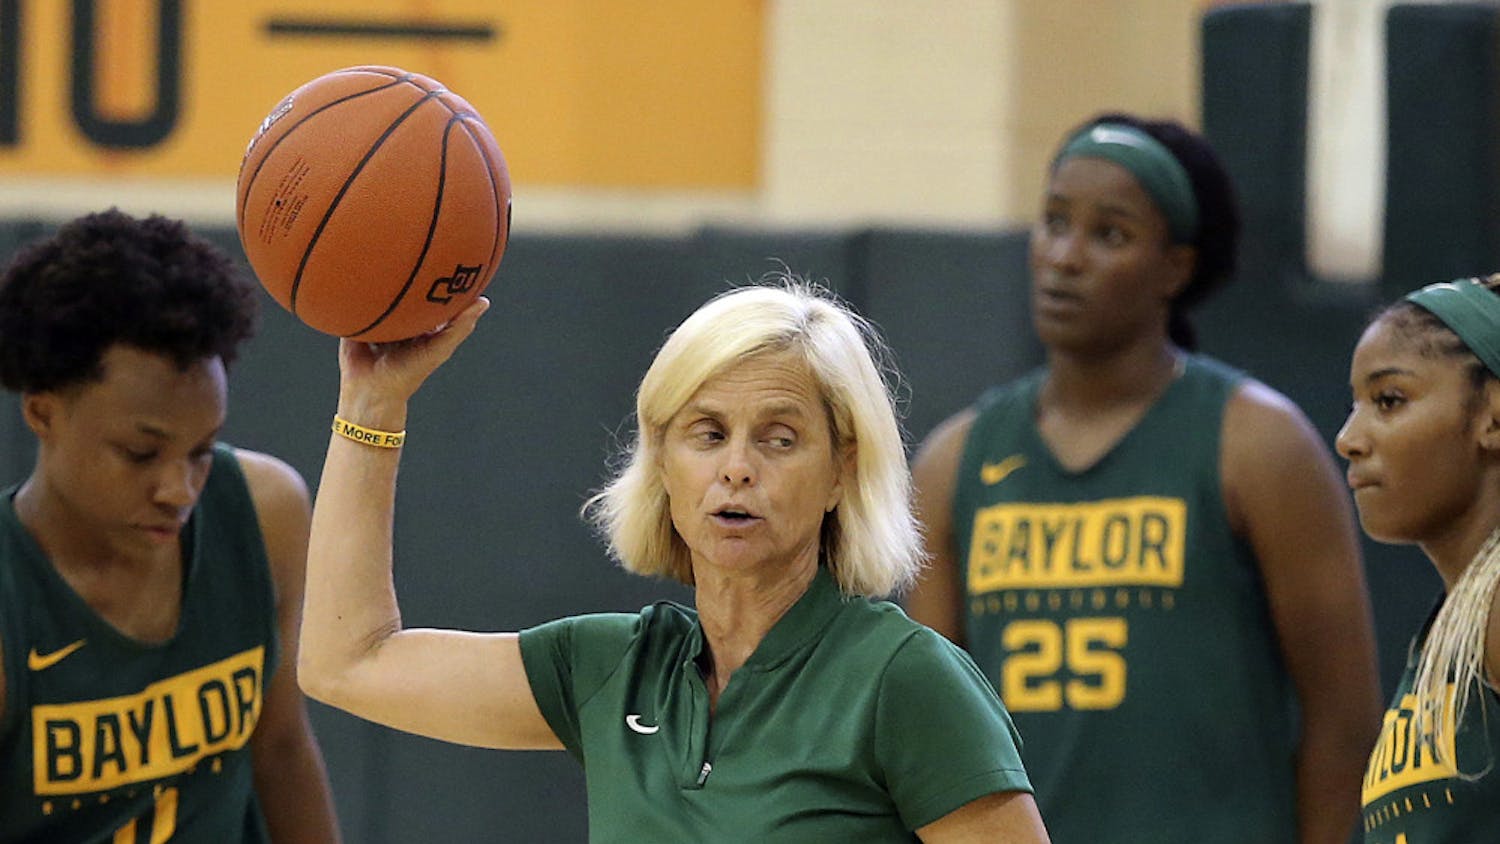 FILE - In this Sept. 30, 2019, file photo, Baylor women's coach Kim Mulkey, center, talks with players during the NCAA college basketball team's practice in Waco, Texas. The NCAA Division I Council on Wednesday, June 17, 2020, approved a plan to allow college basketball players to start working with their coaches for the first time since the pandemic wiped out March Madness. The summer access period for men's and women's players will begin July 20. (Jerry Larson/Waco Tribune-Herald via AP, File)